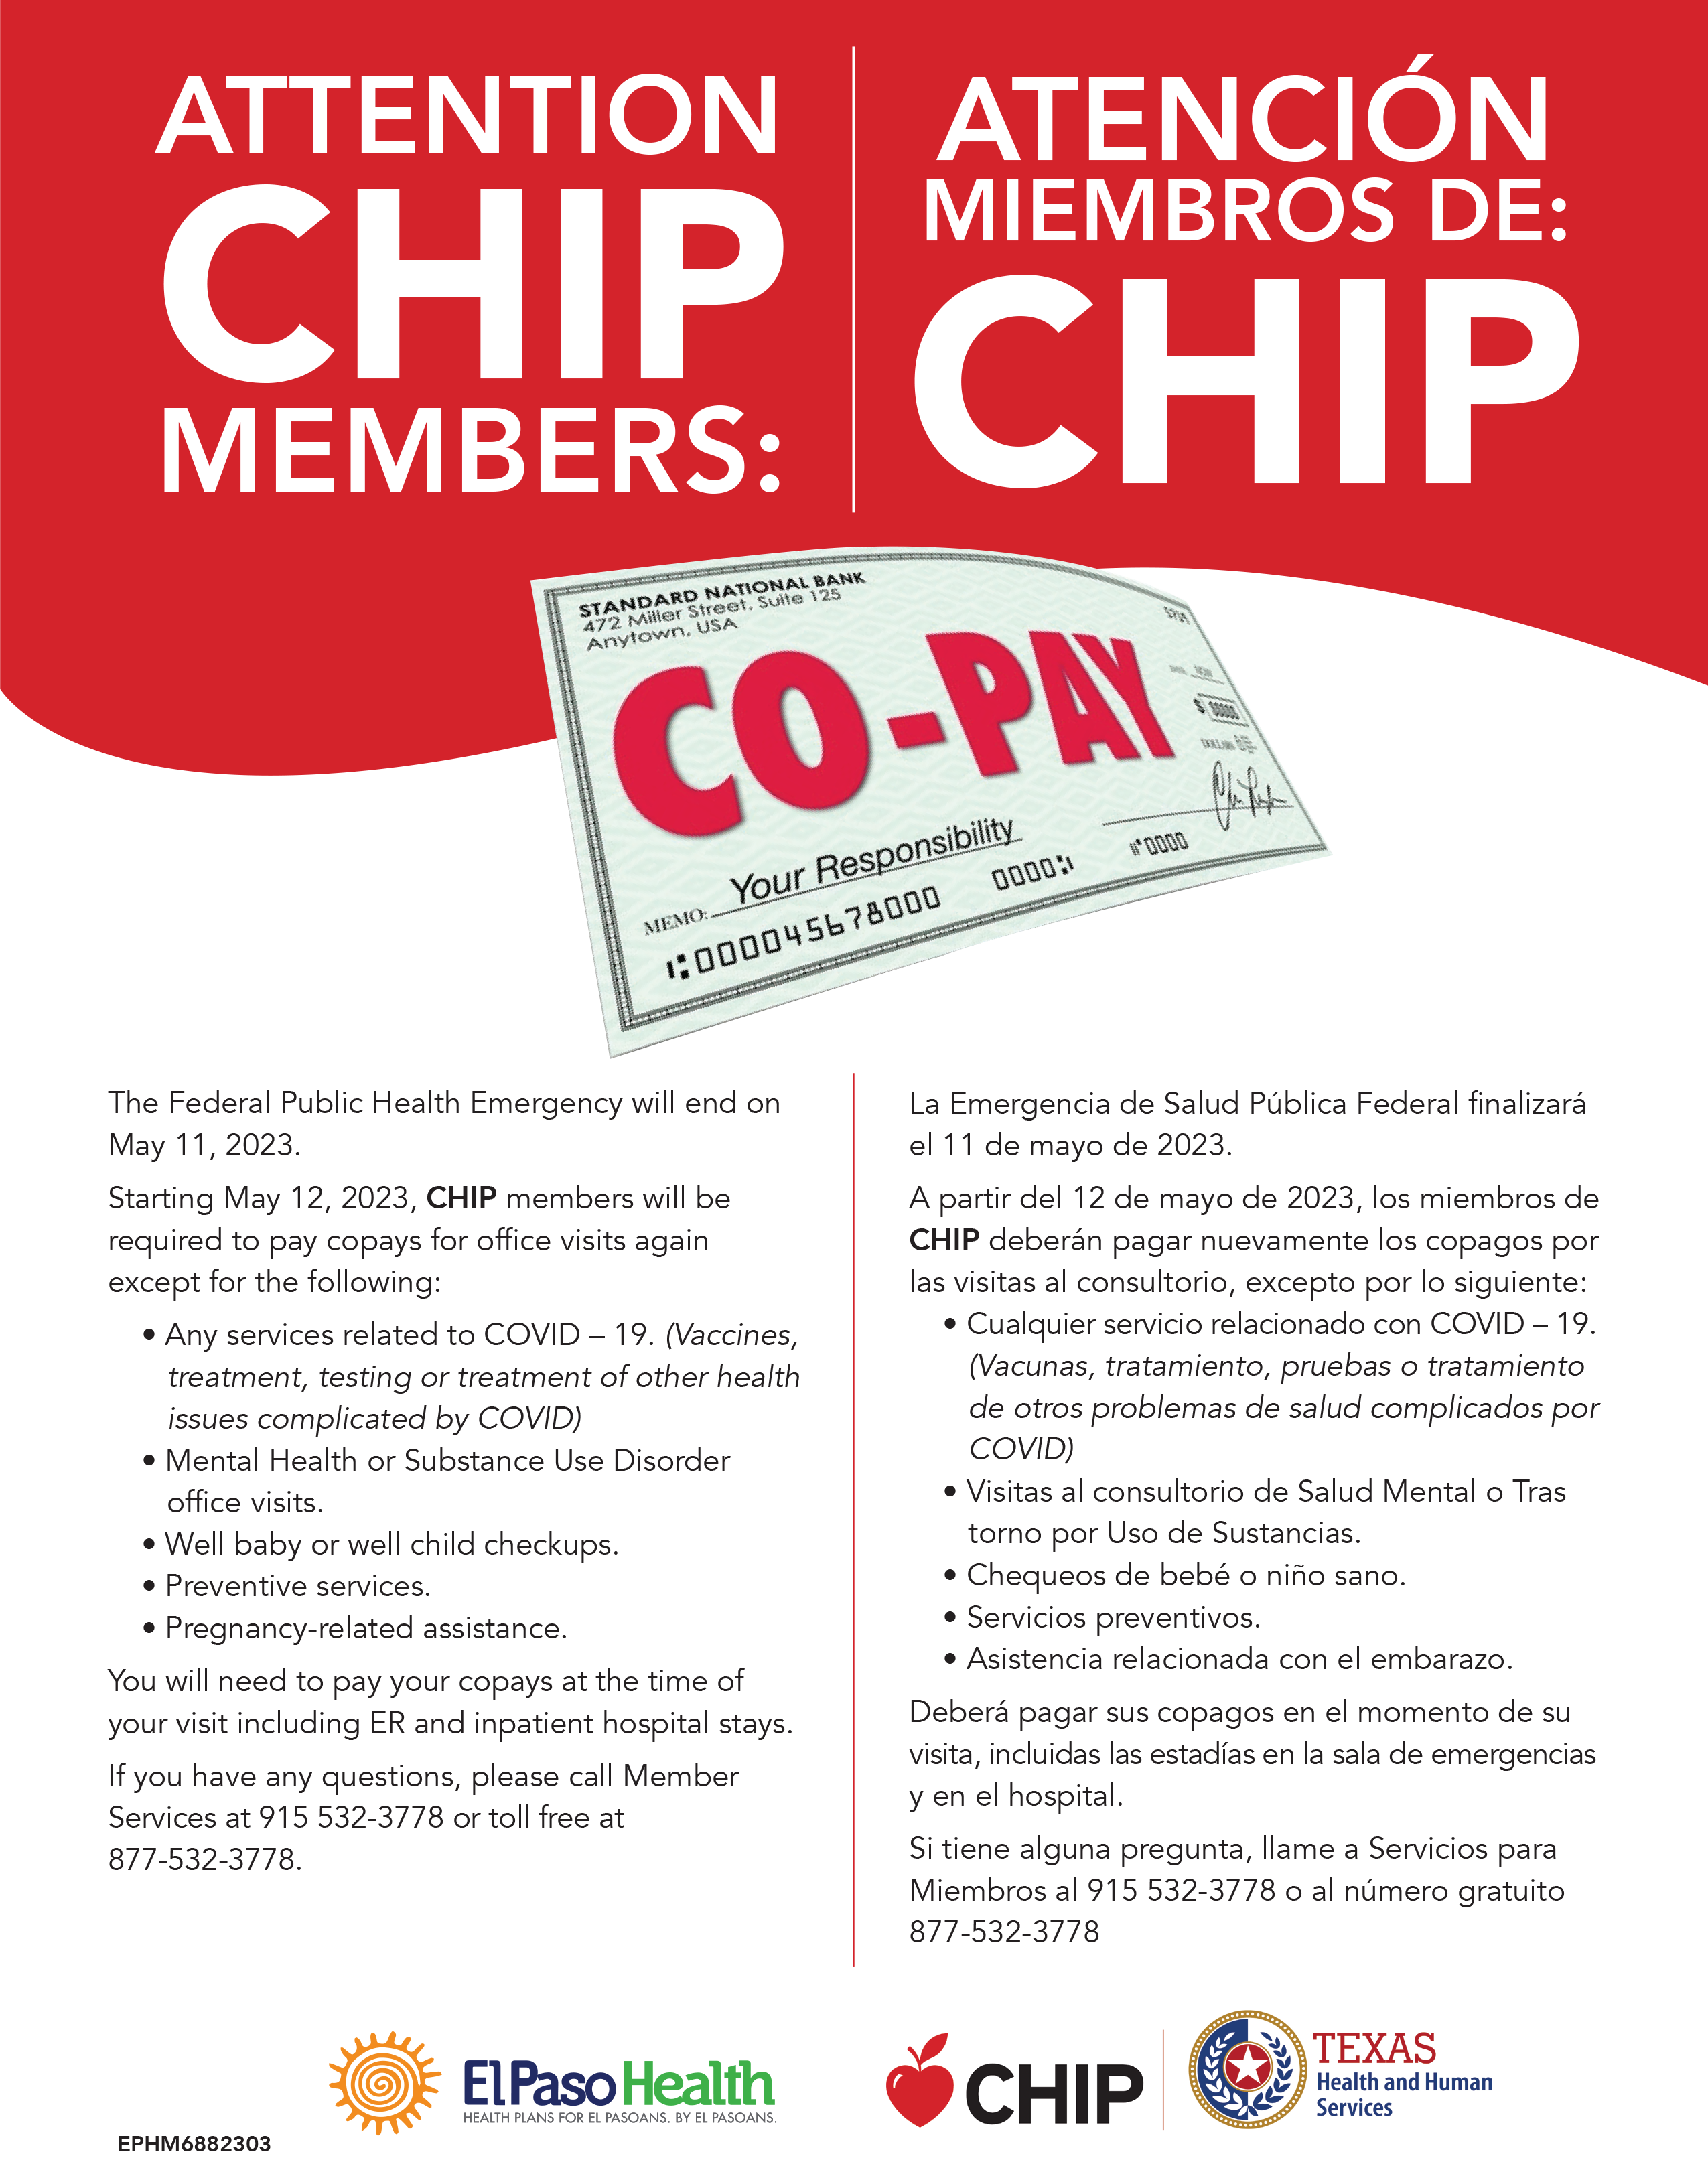 The Federal Public Health Emergency will end on May 11, 2023. 
Starting May 12, 2023, CHIP members will be required to pay copays for office visits again except for the following: •	Any services related to COVID - 19. (Vaccines, treatment, testing or treatment of other health issues complicated by COVID)
•	Mental Health or Substance Use Disorder office visits.
•	Well baby or well child checkups.
•	Preventive services.
•	Pregnancy-related assistance.
You will need to pay your copays at the time of your visit including ER and inpatient hospital stays. 
If you have any questions, please call Member Services at 915 532-3778 or toll free at 877-532-3778. 